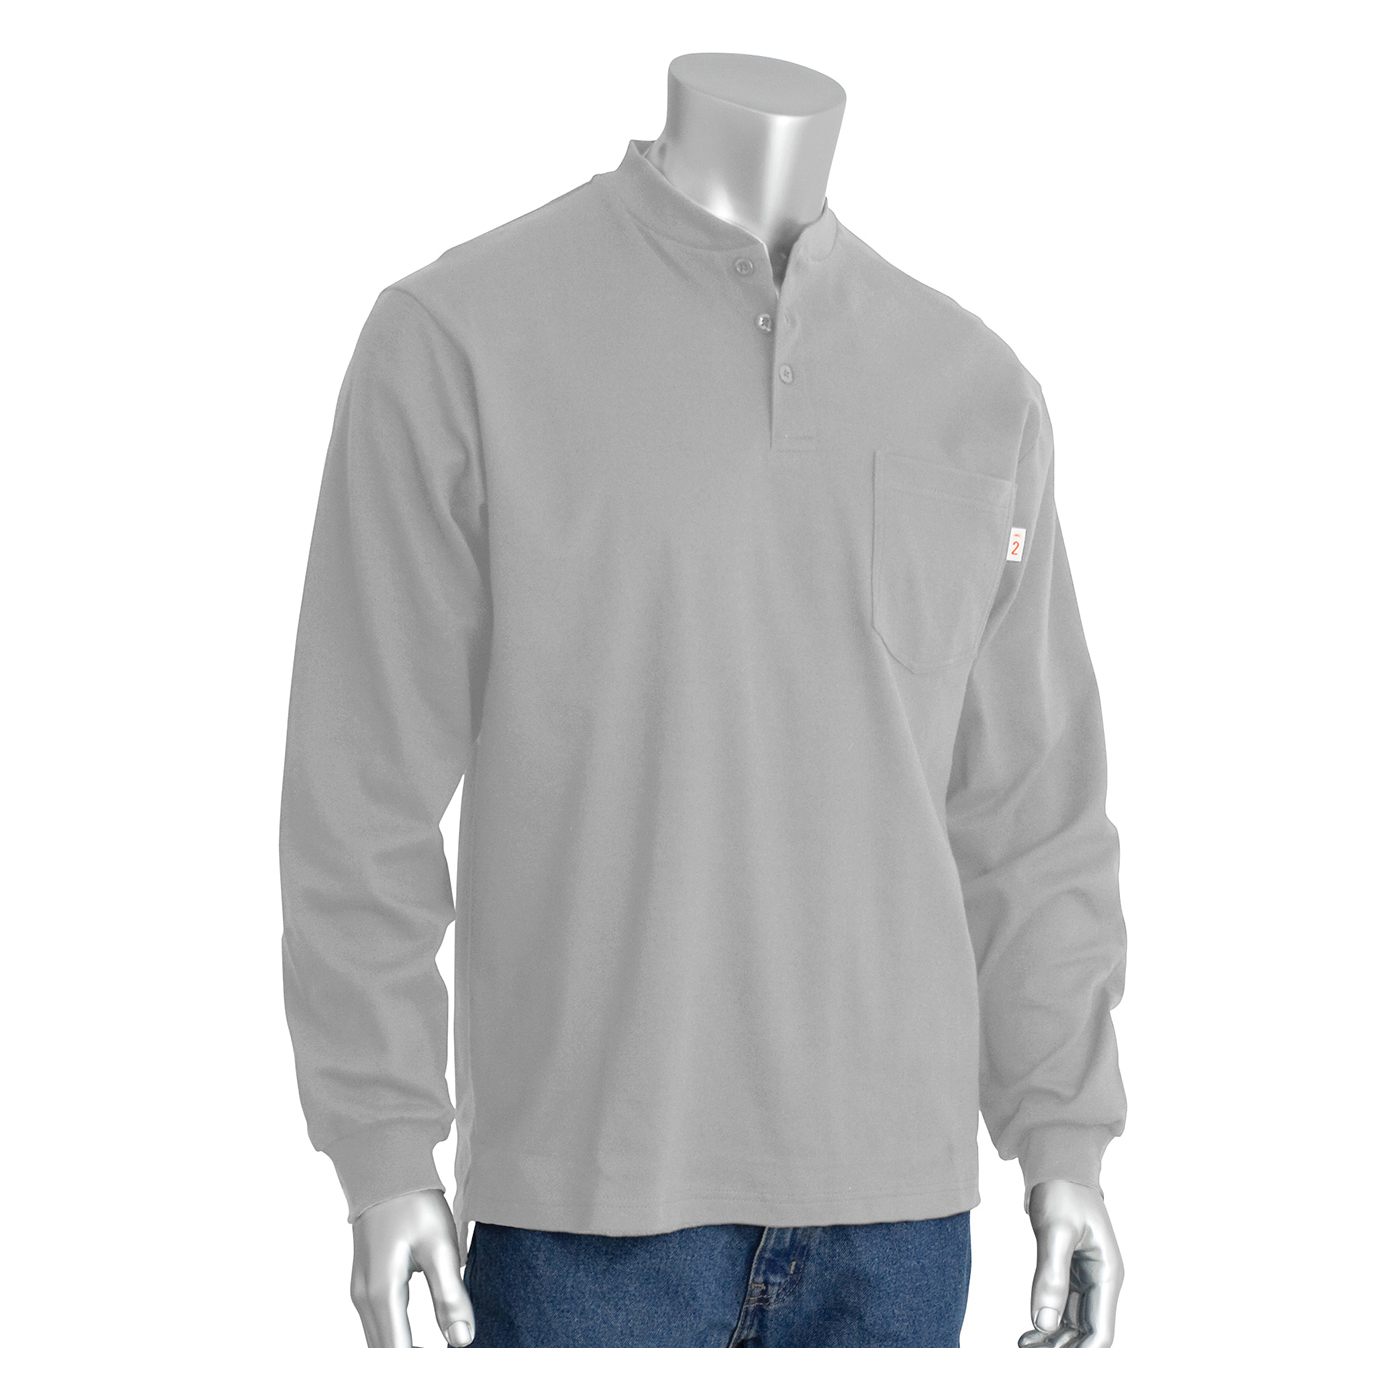 PIP® 385-FRHN-(LG)-L Arc and Flame-Resistant Long Sleeve Henley Shirt, L, Light Gray, Cotton Interlock Knit, 31 in L